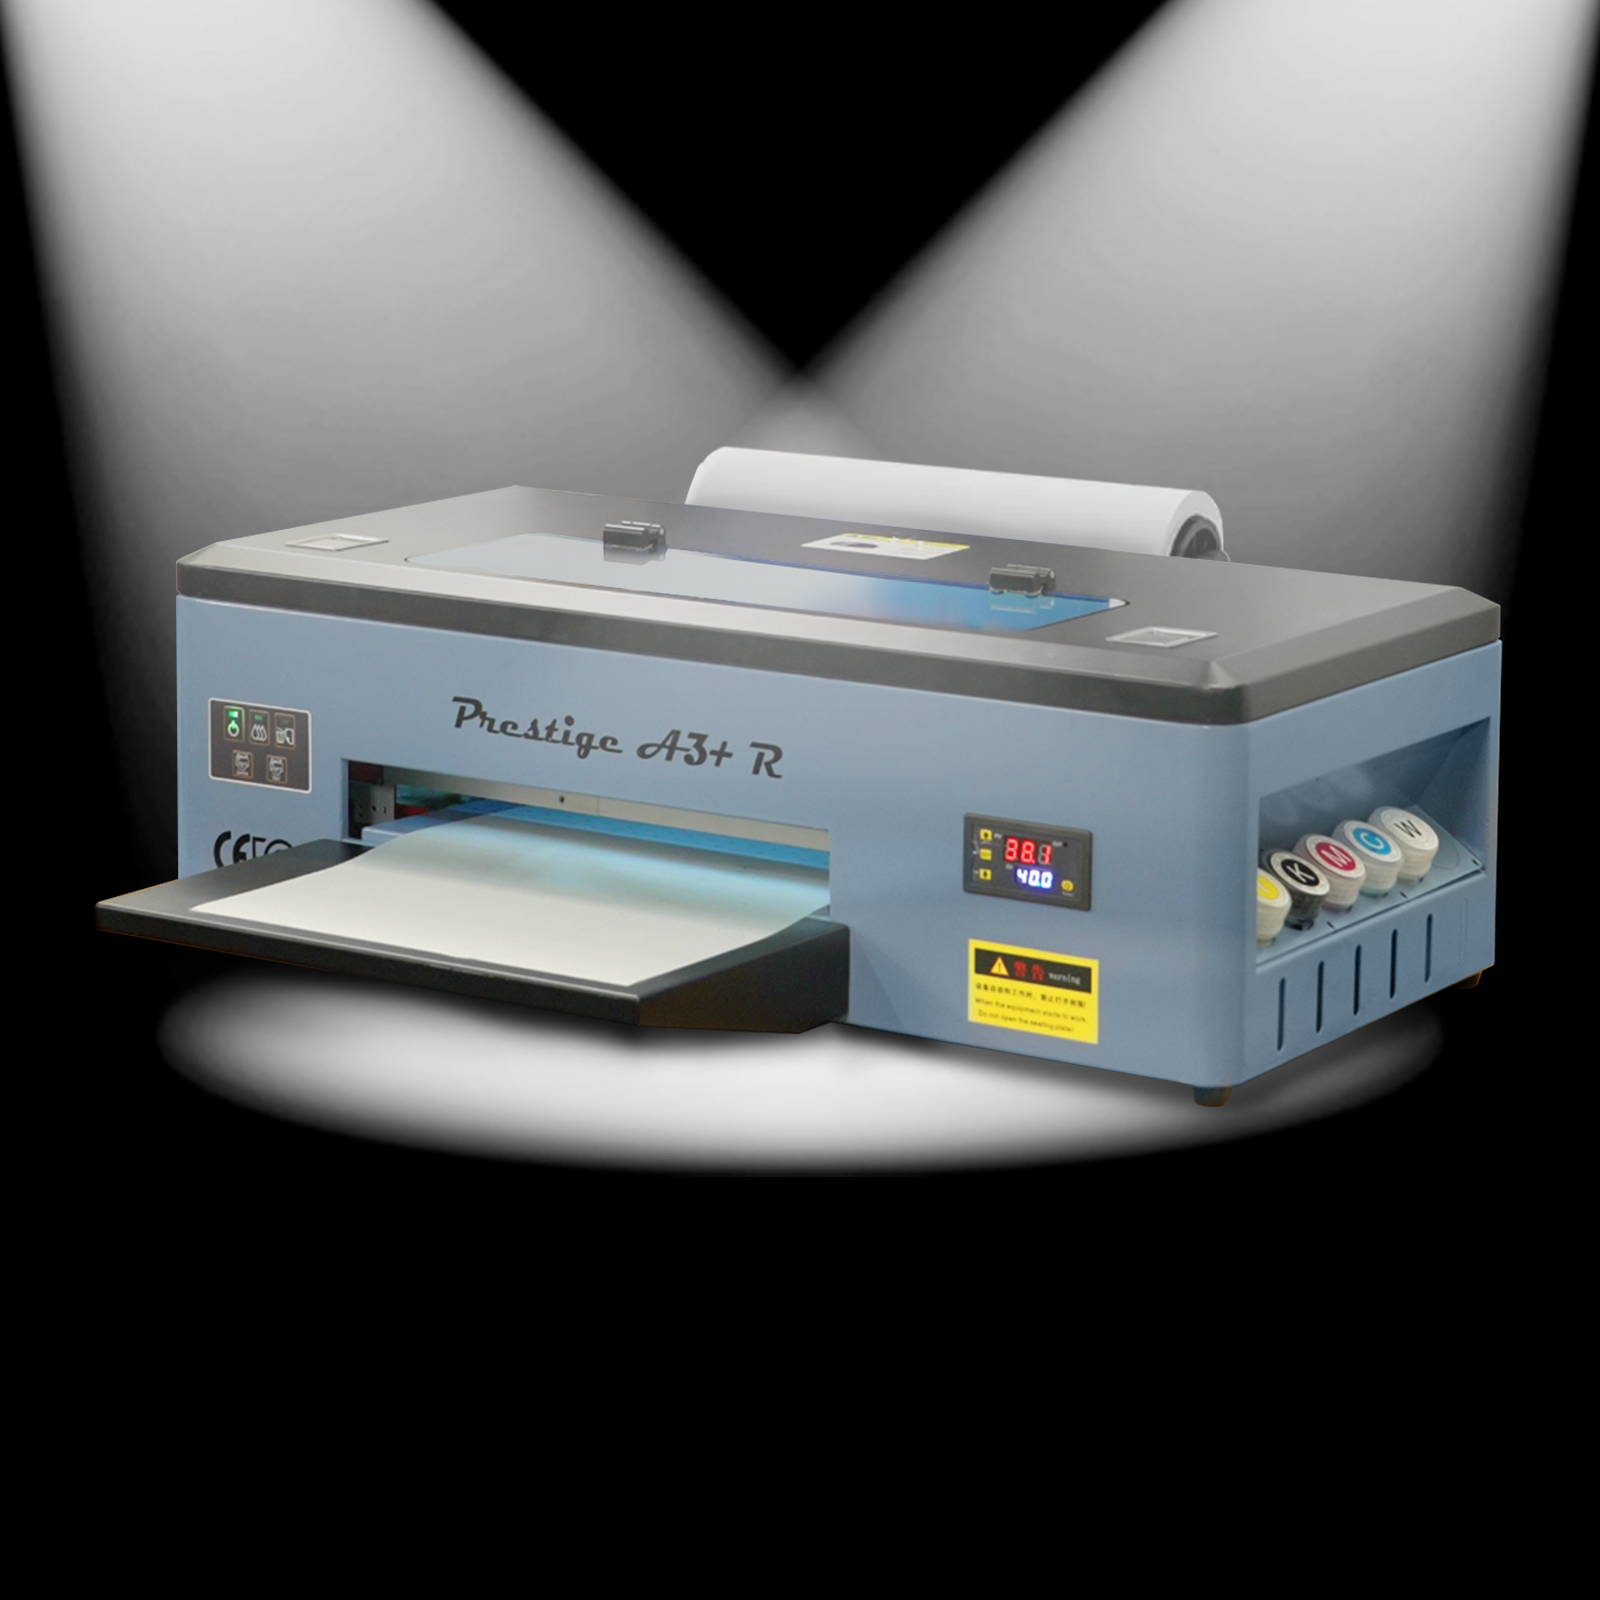 Prestige A3+ R. Boost your DTF printing potential with the new addition to the Prestige Printer line - the Prestige A3+ R DTF Printer! Print on DTF film rolls or sheets, and speed up your DTF pipeline for efficiency, ease-of-use, and optimal results.